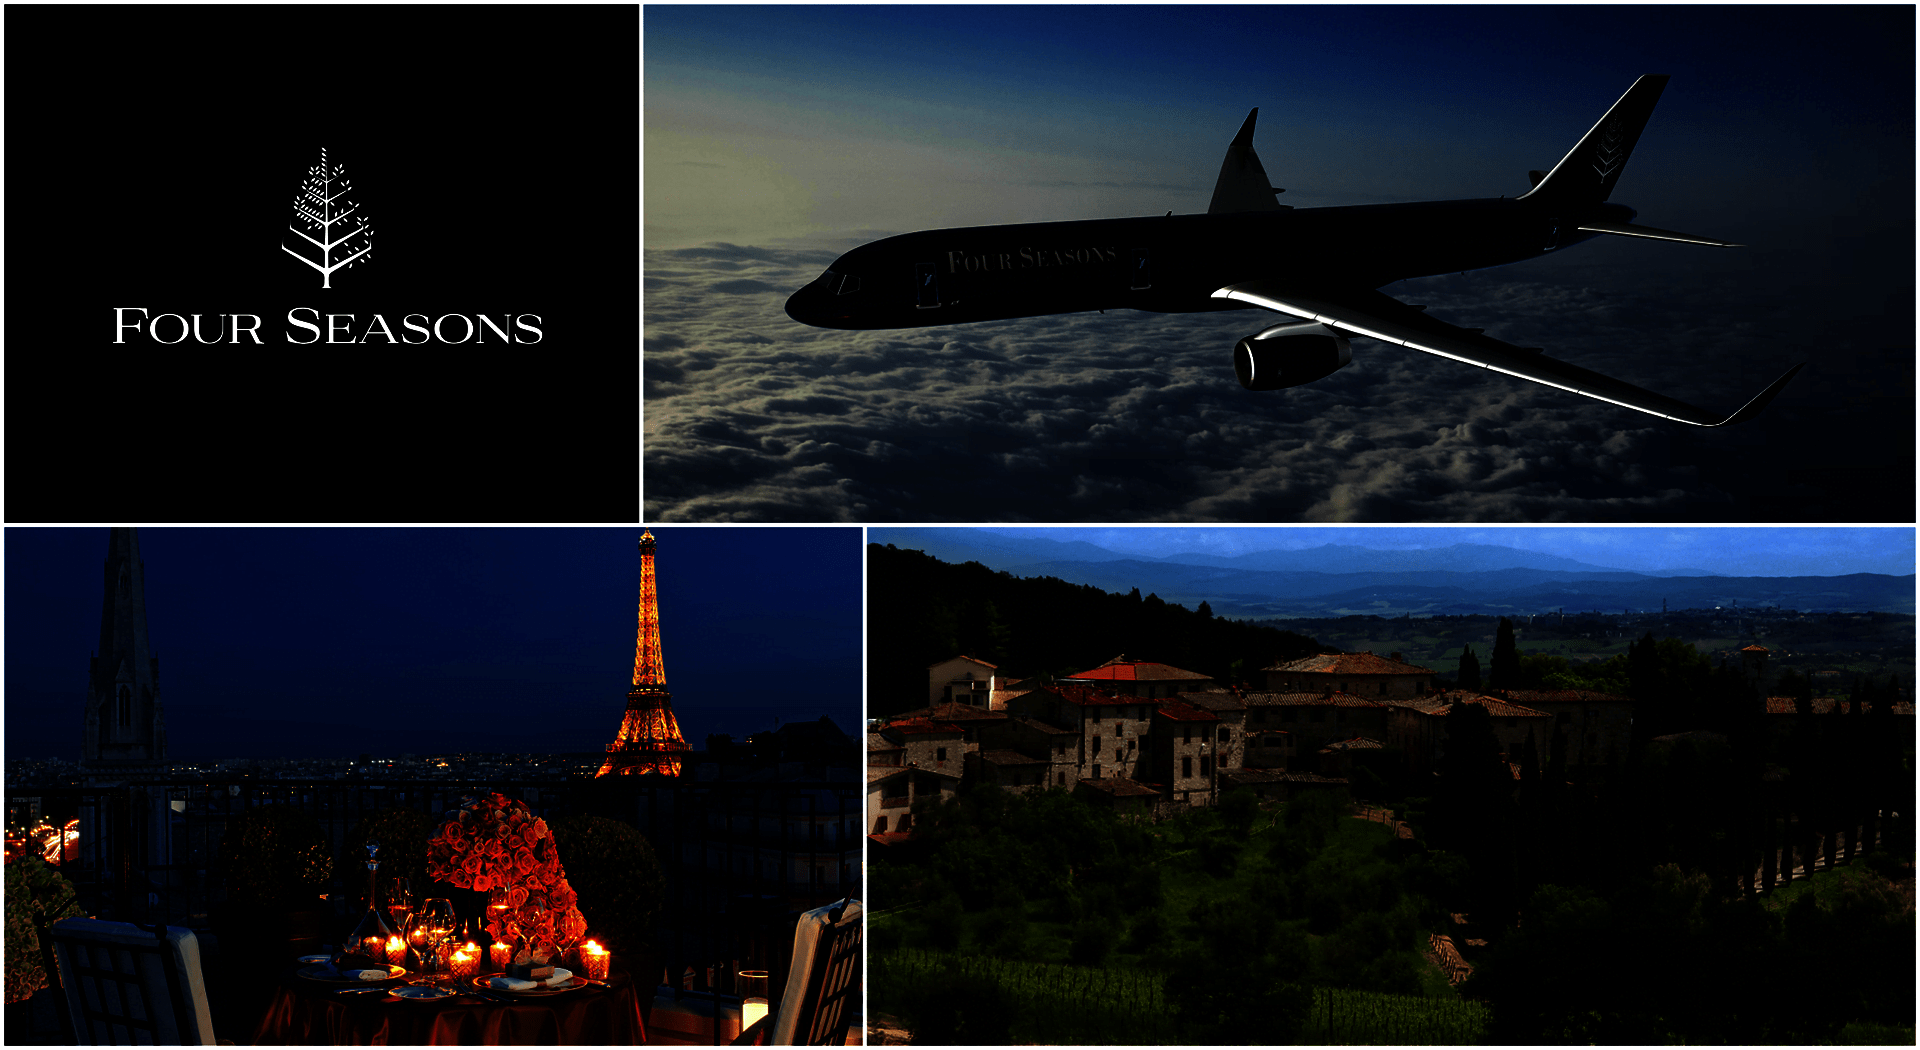 Four Seasons Private Jet: Luxury Travel Opportunities in 2017